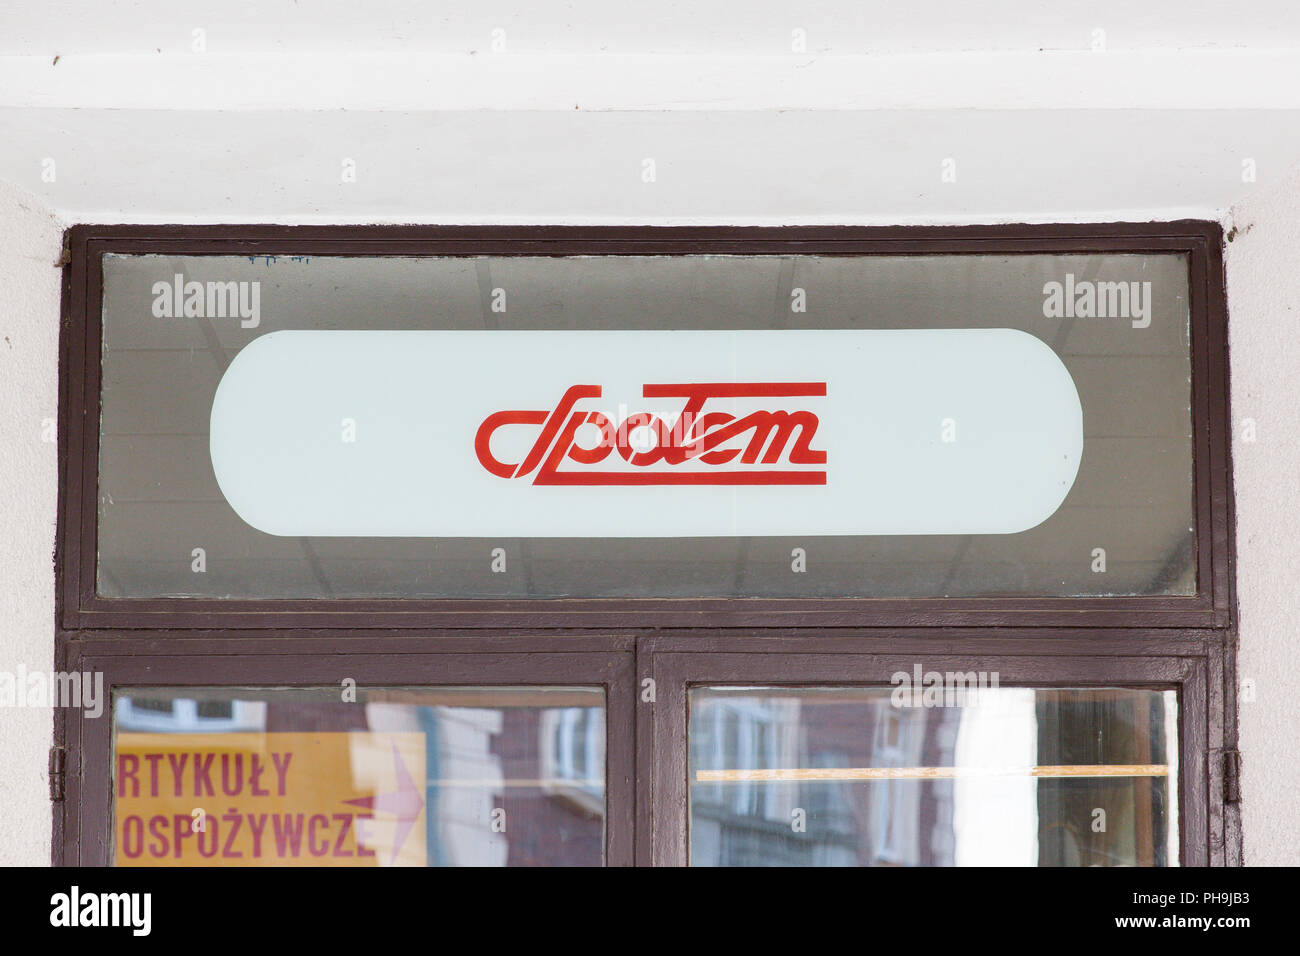 Spolem logo sign at the entrance door to the store is a Polish consumers' co-operative chain of local grocery stores founded in 1868 Stock Photo